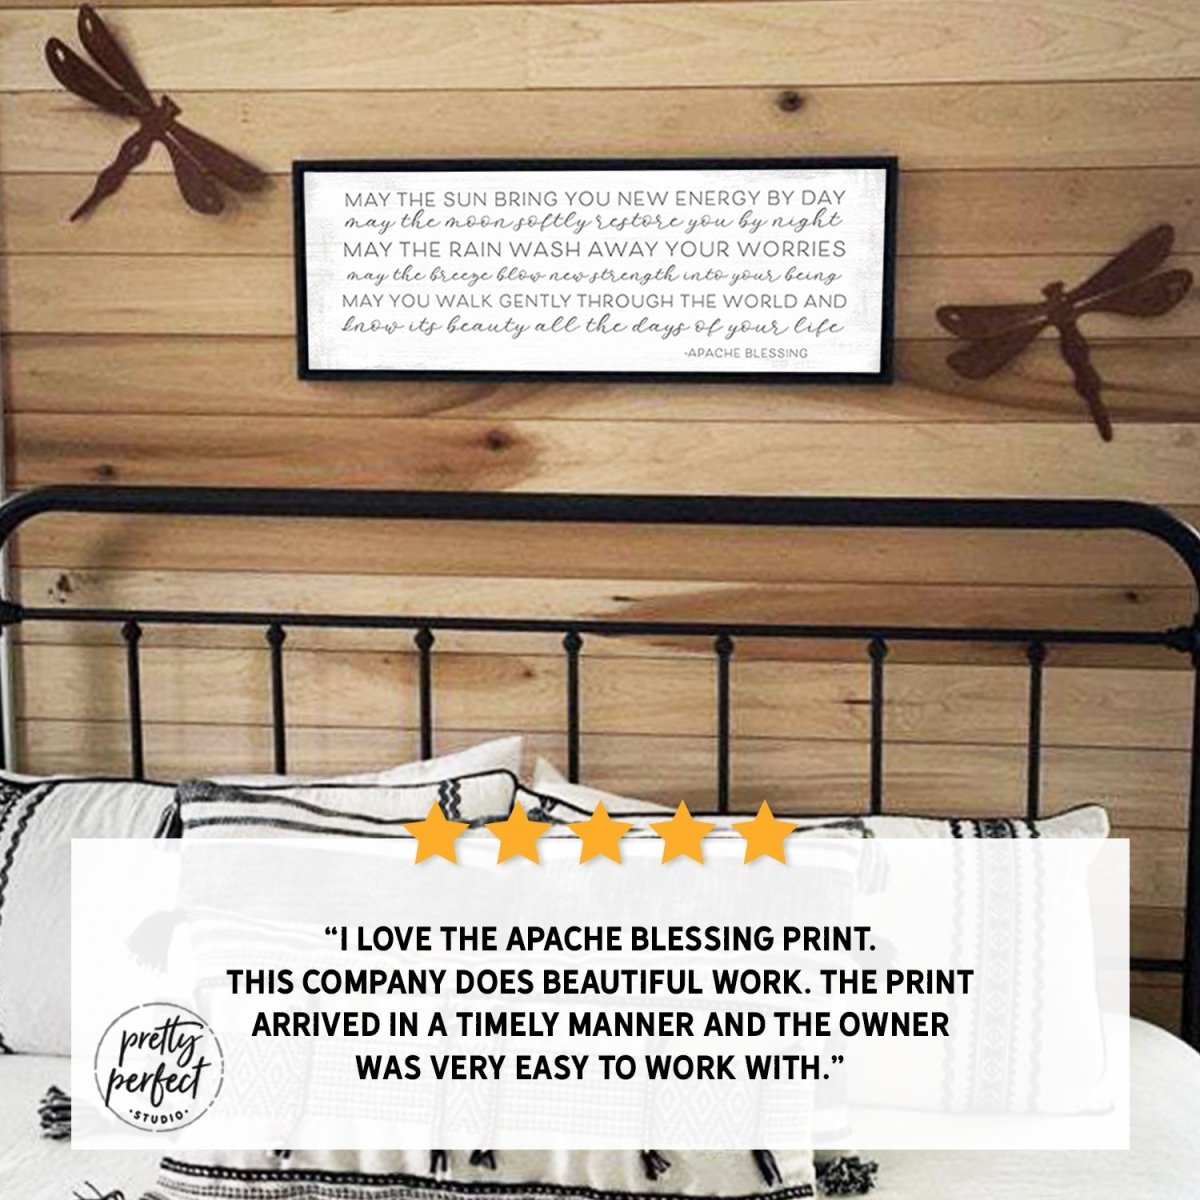 Customer product review for Apache Wedding Blessing Sign by Pretty Perfect Studio